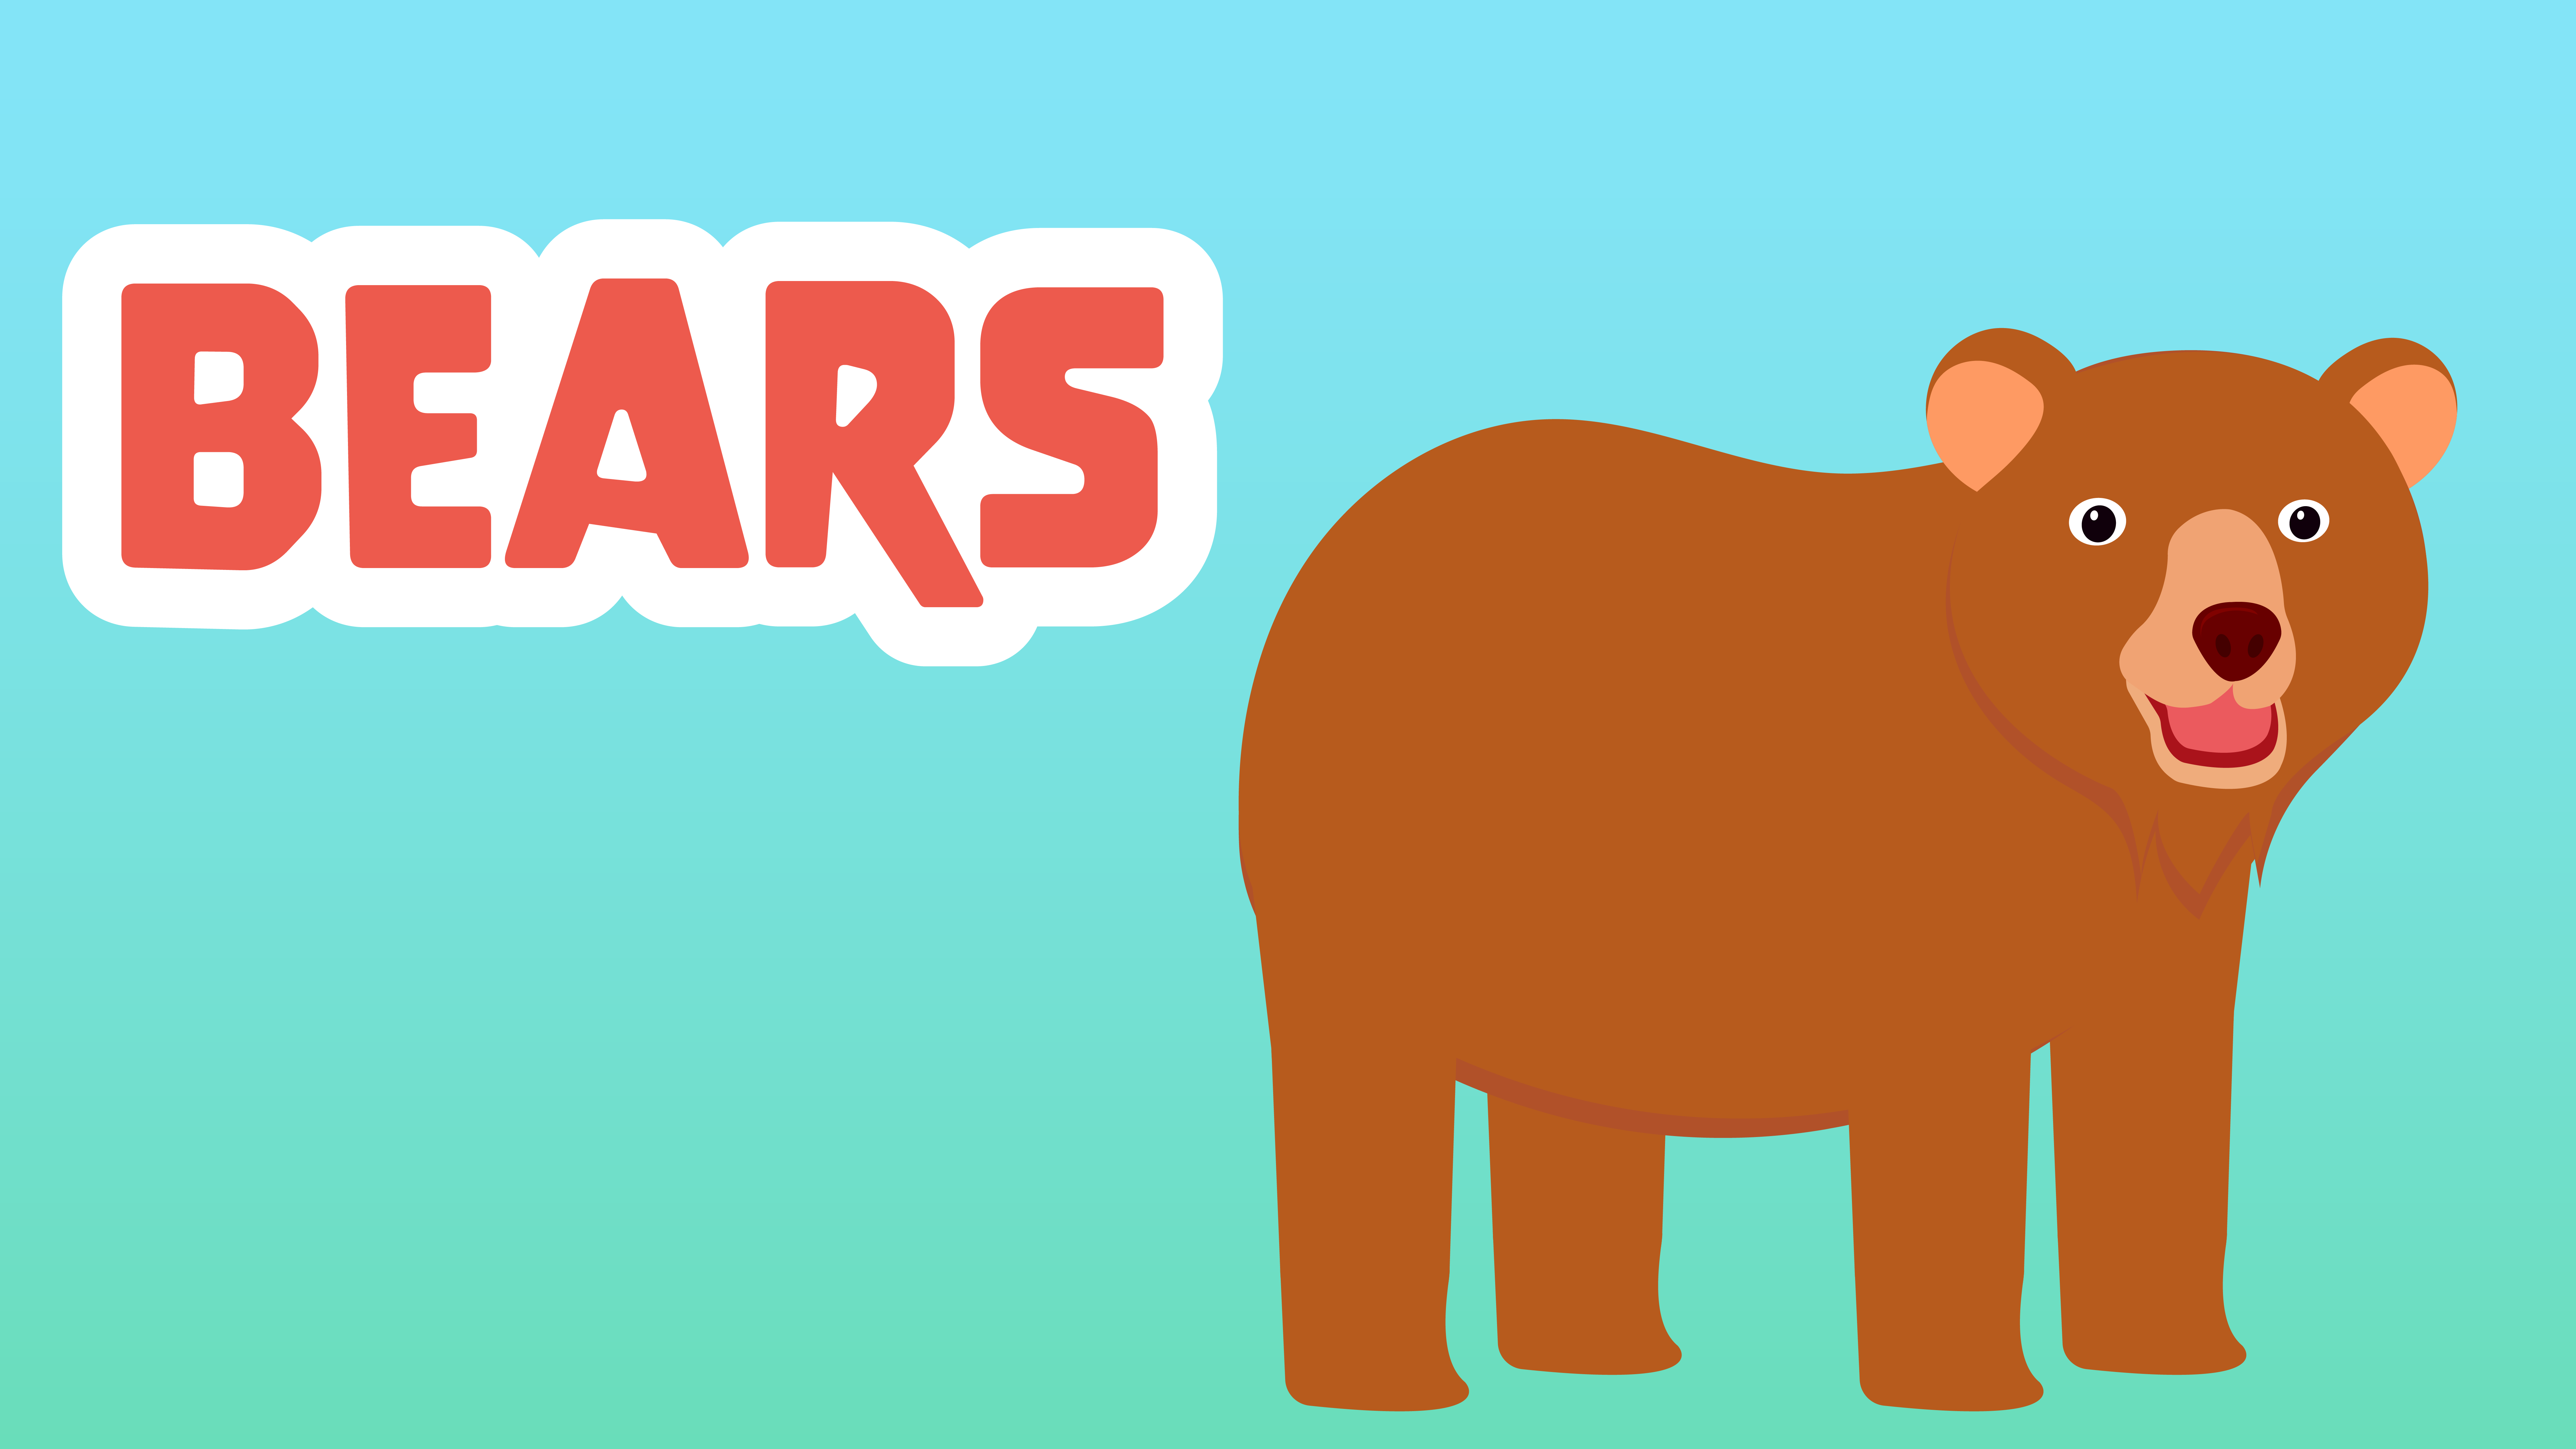 Bears Facts for Kids – 5 Bright Facts about Bears